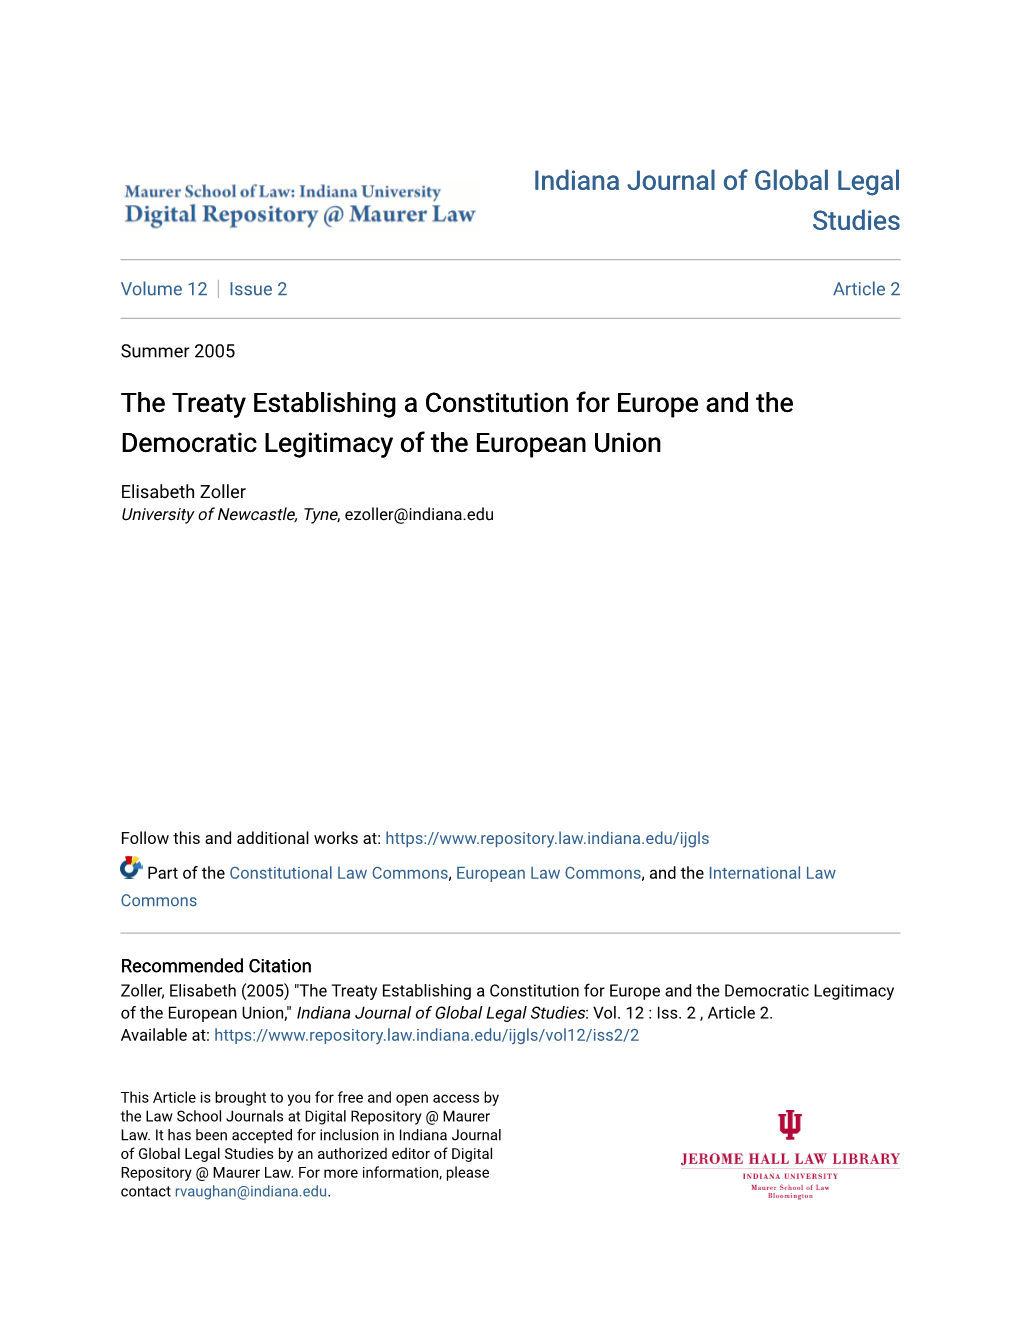 The Treaty Establishing a Constitution for Europe and the Democratic Legitimacy of the European Union